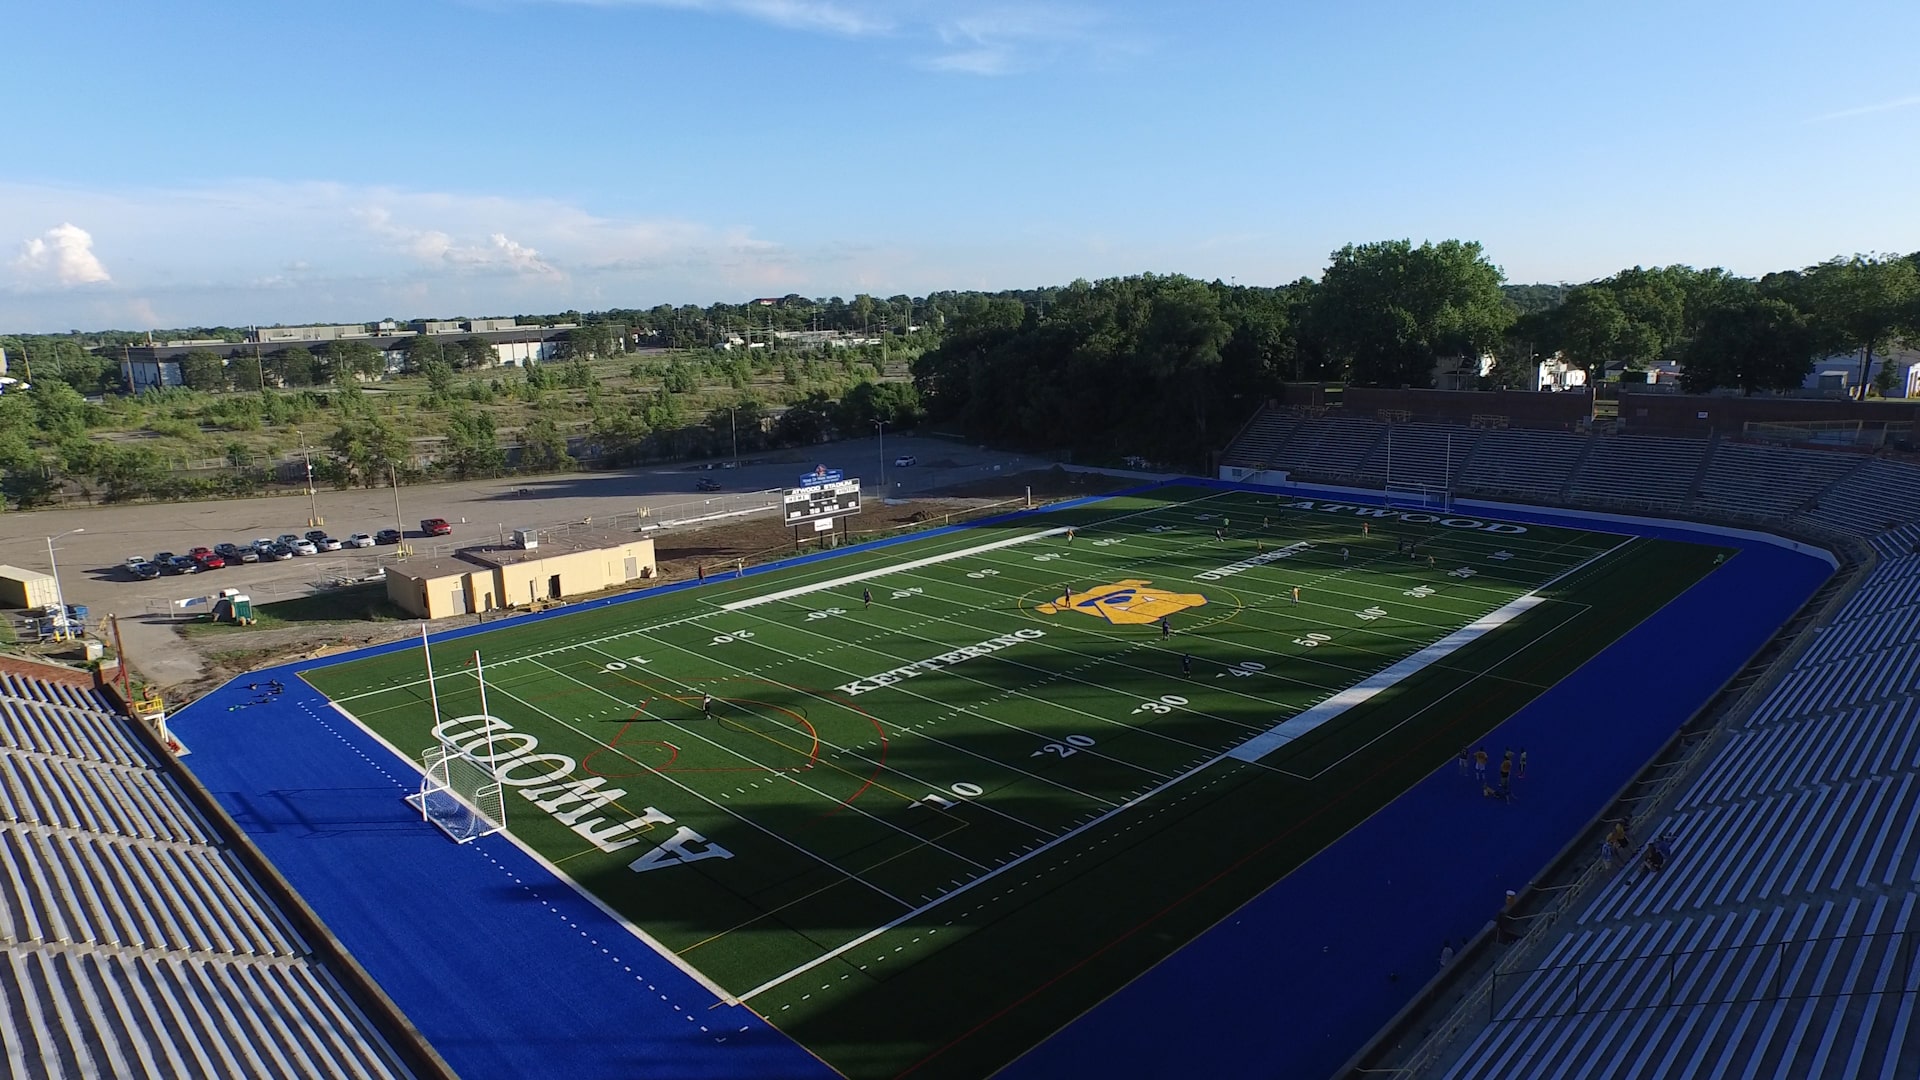 An aerial view of Kettering's historic Atwood Stadium